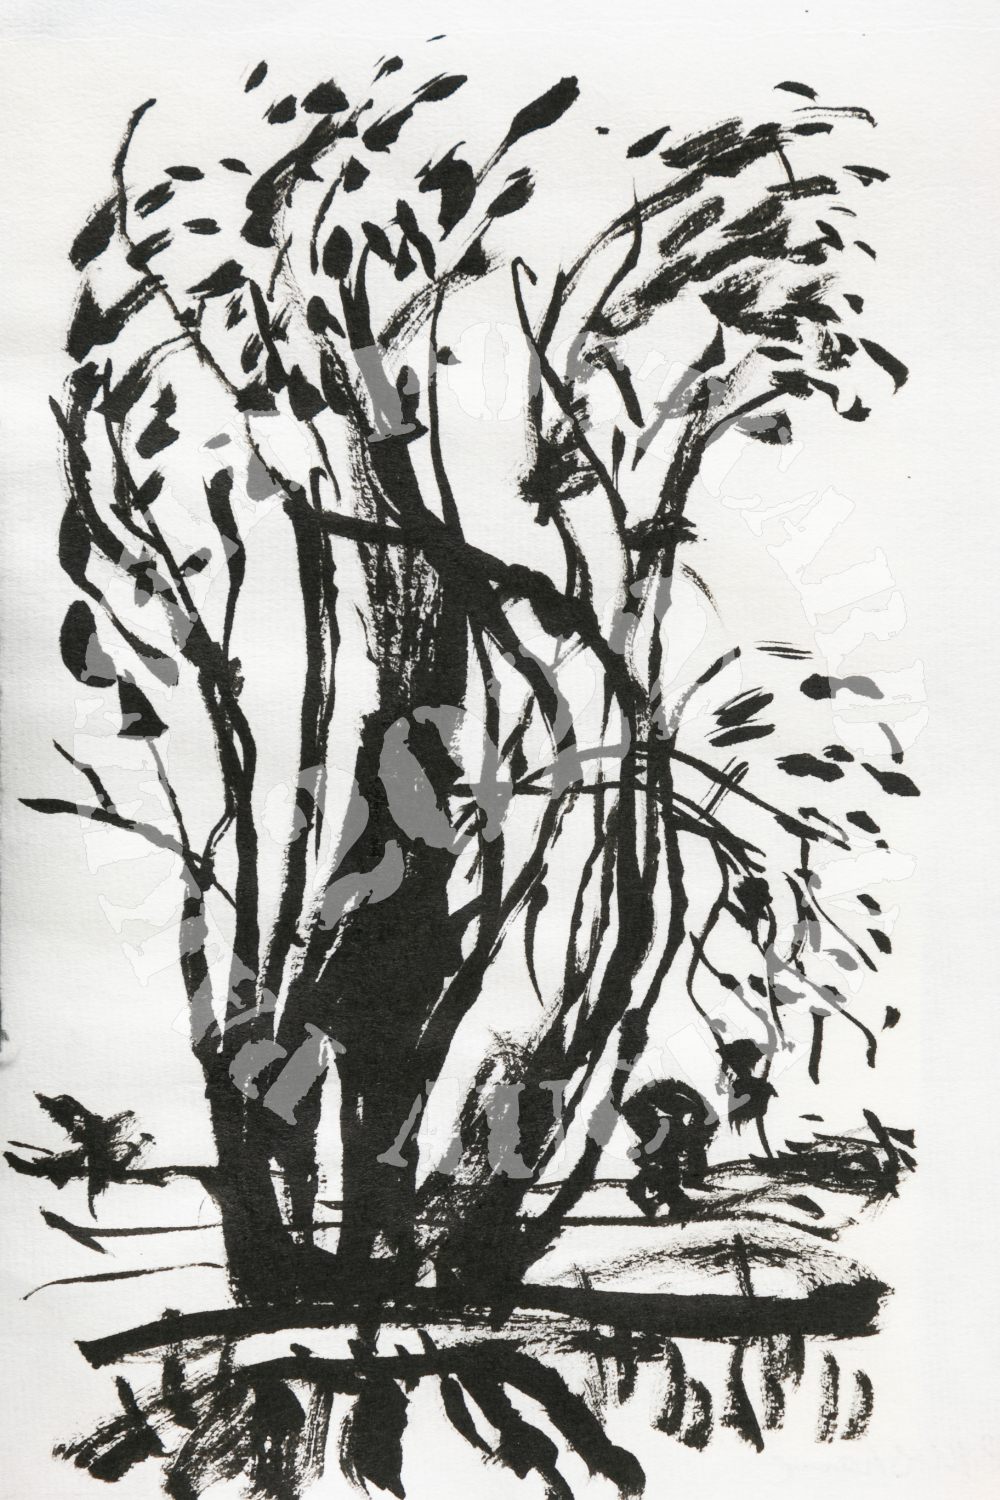 Ash Trees #2. Ink on paper.